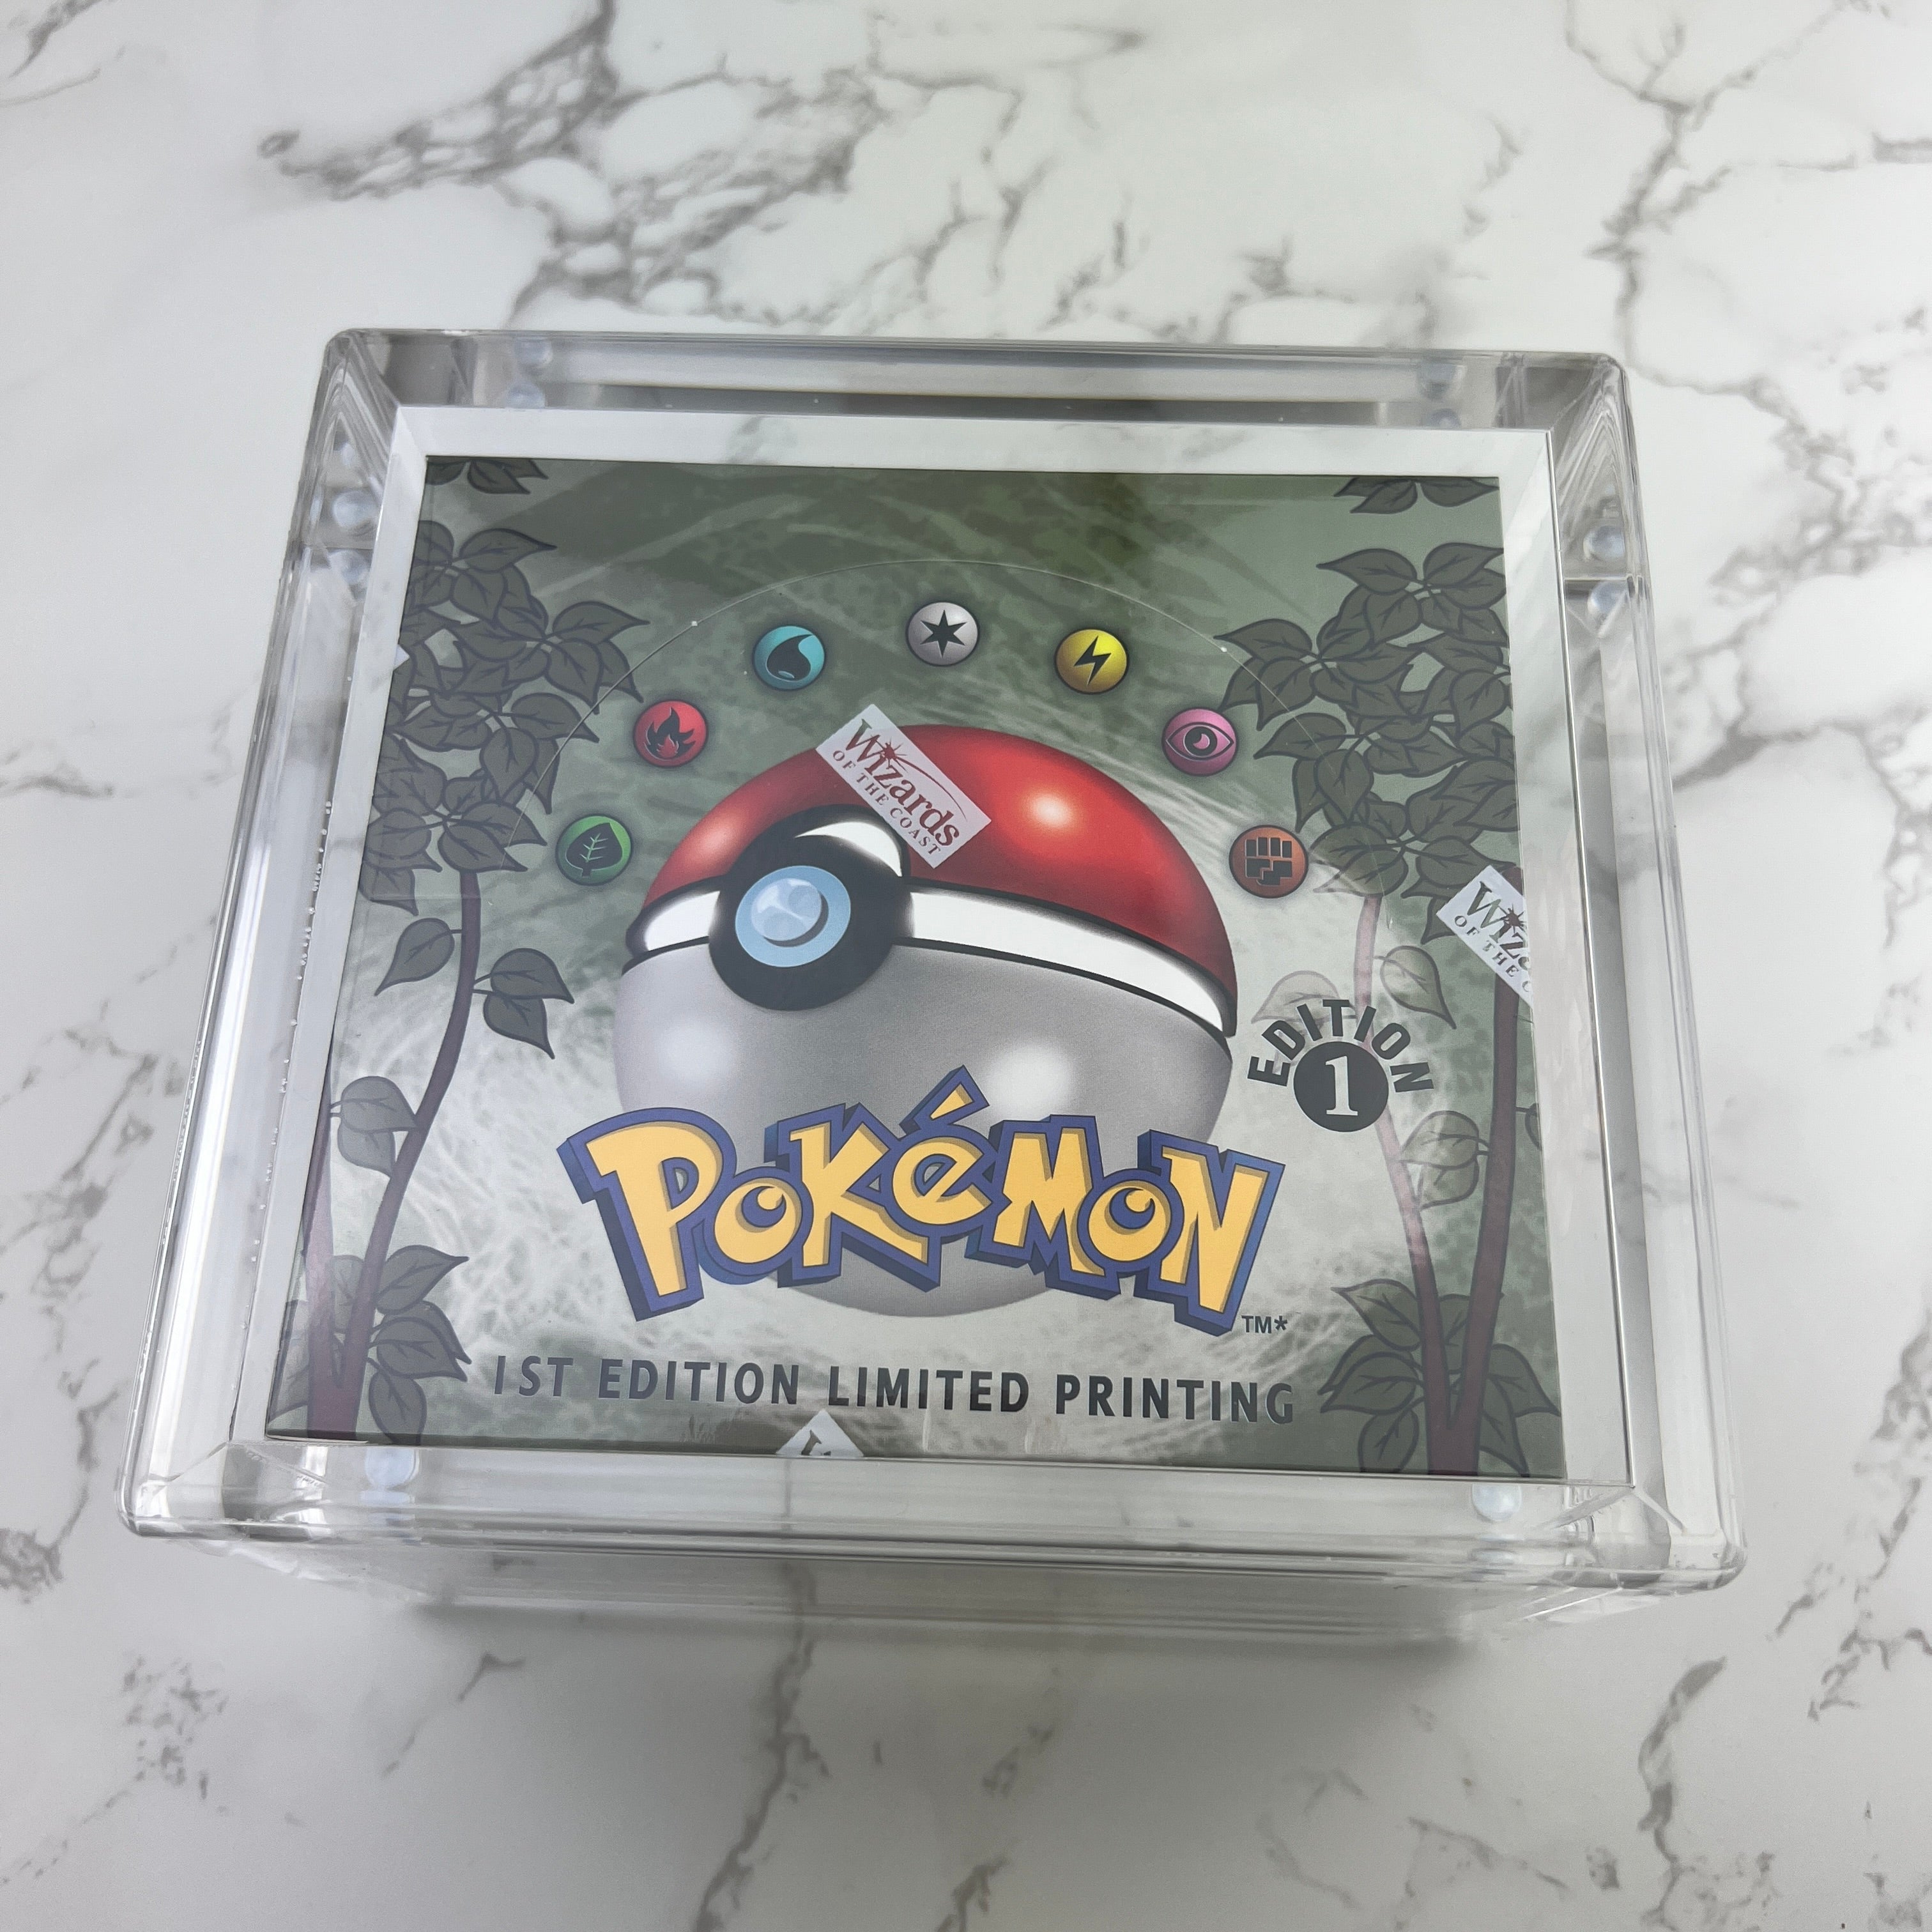 Pokemon booster box magnetic acrylic protective case. Crystal clear acrylic, with UV resistance. Fits: Base Set, Gym, Neo Genesis and Legendary Collection booster boxes.